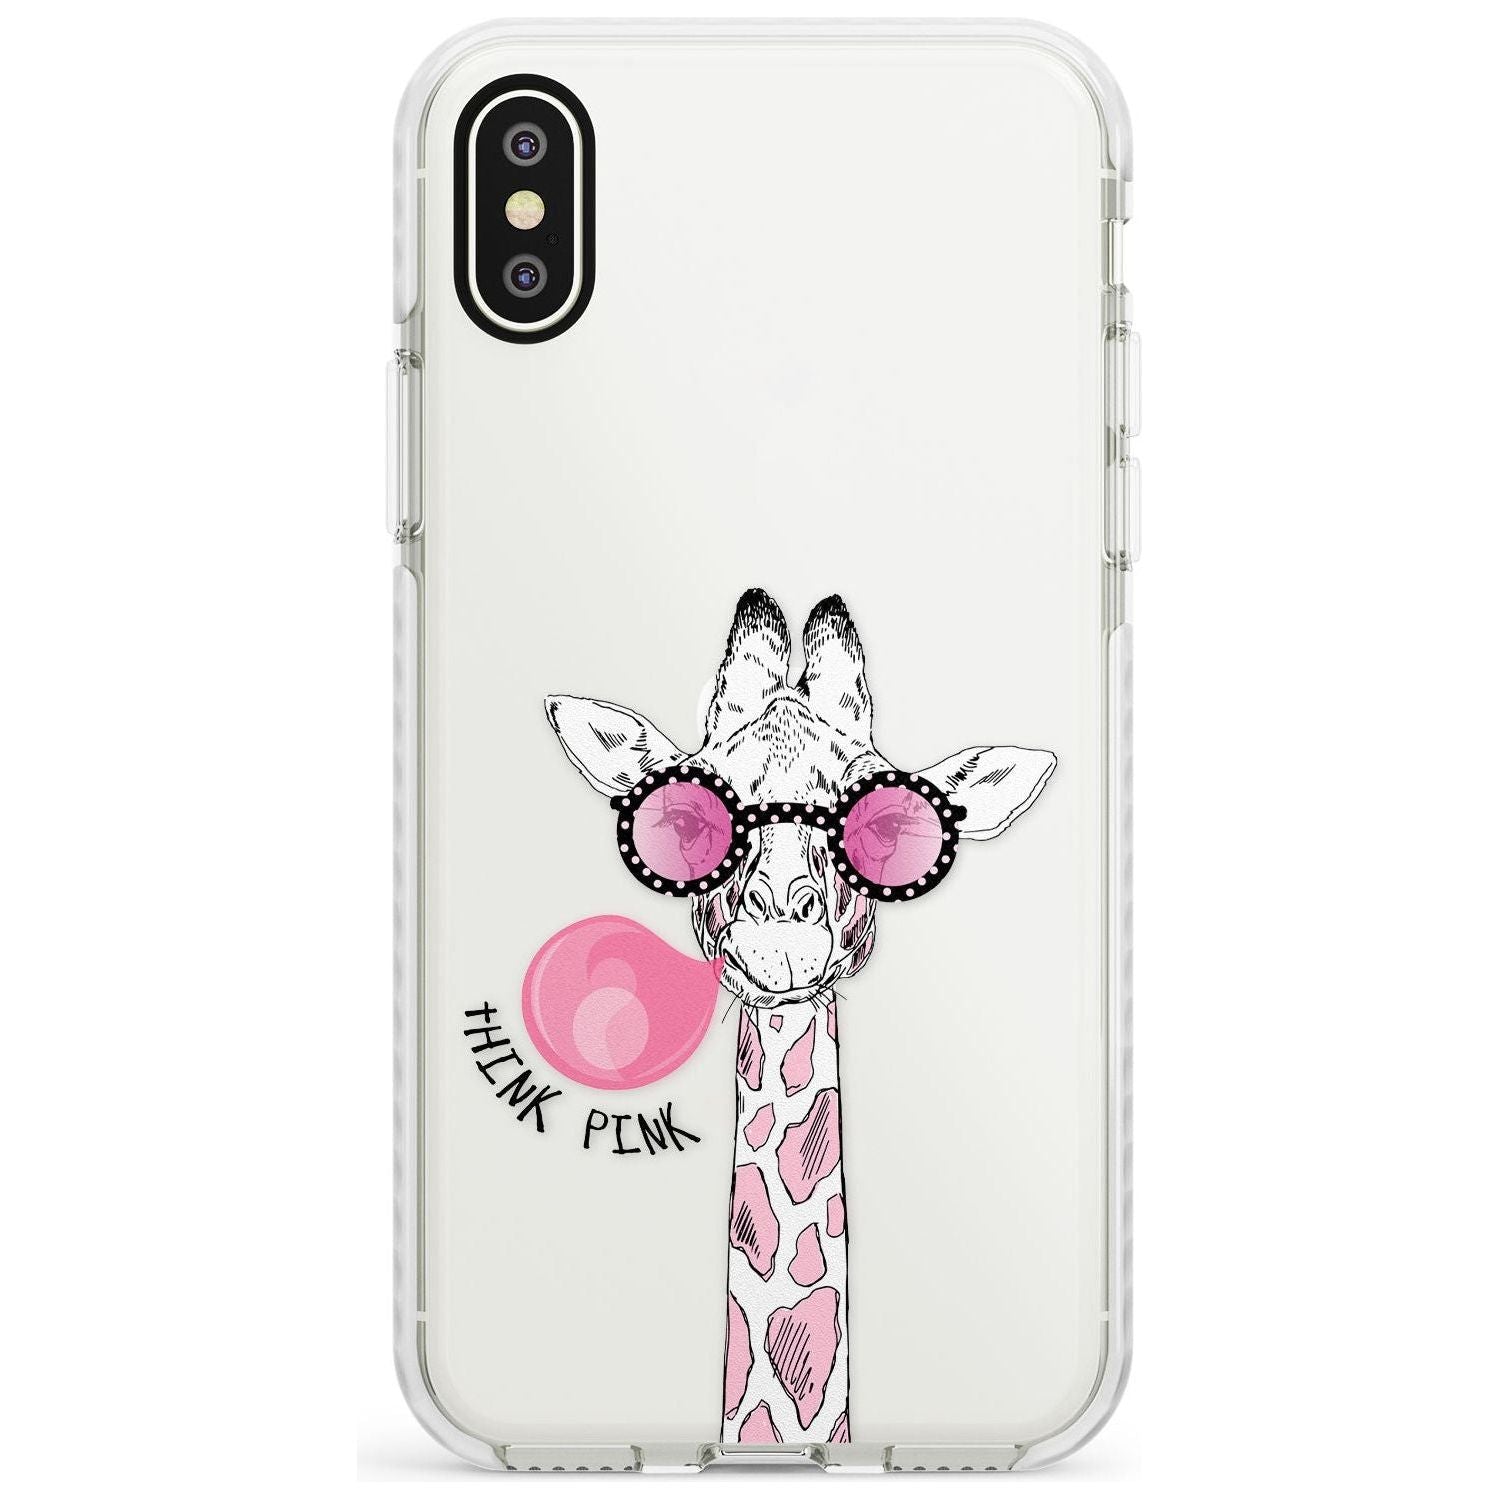 Think Pink Giraffe Impact Phone Case for iPhone X XS Max XR